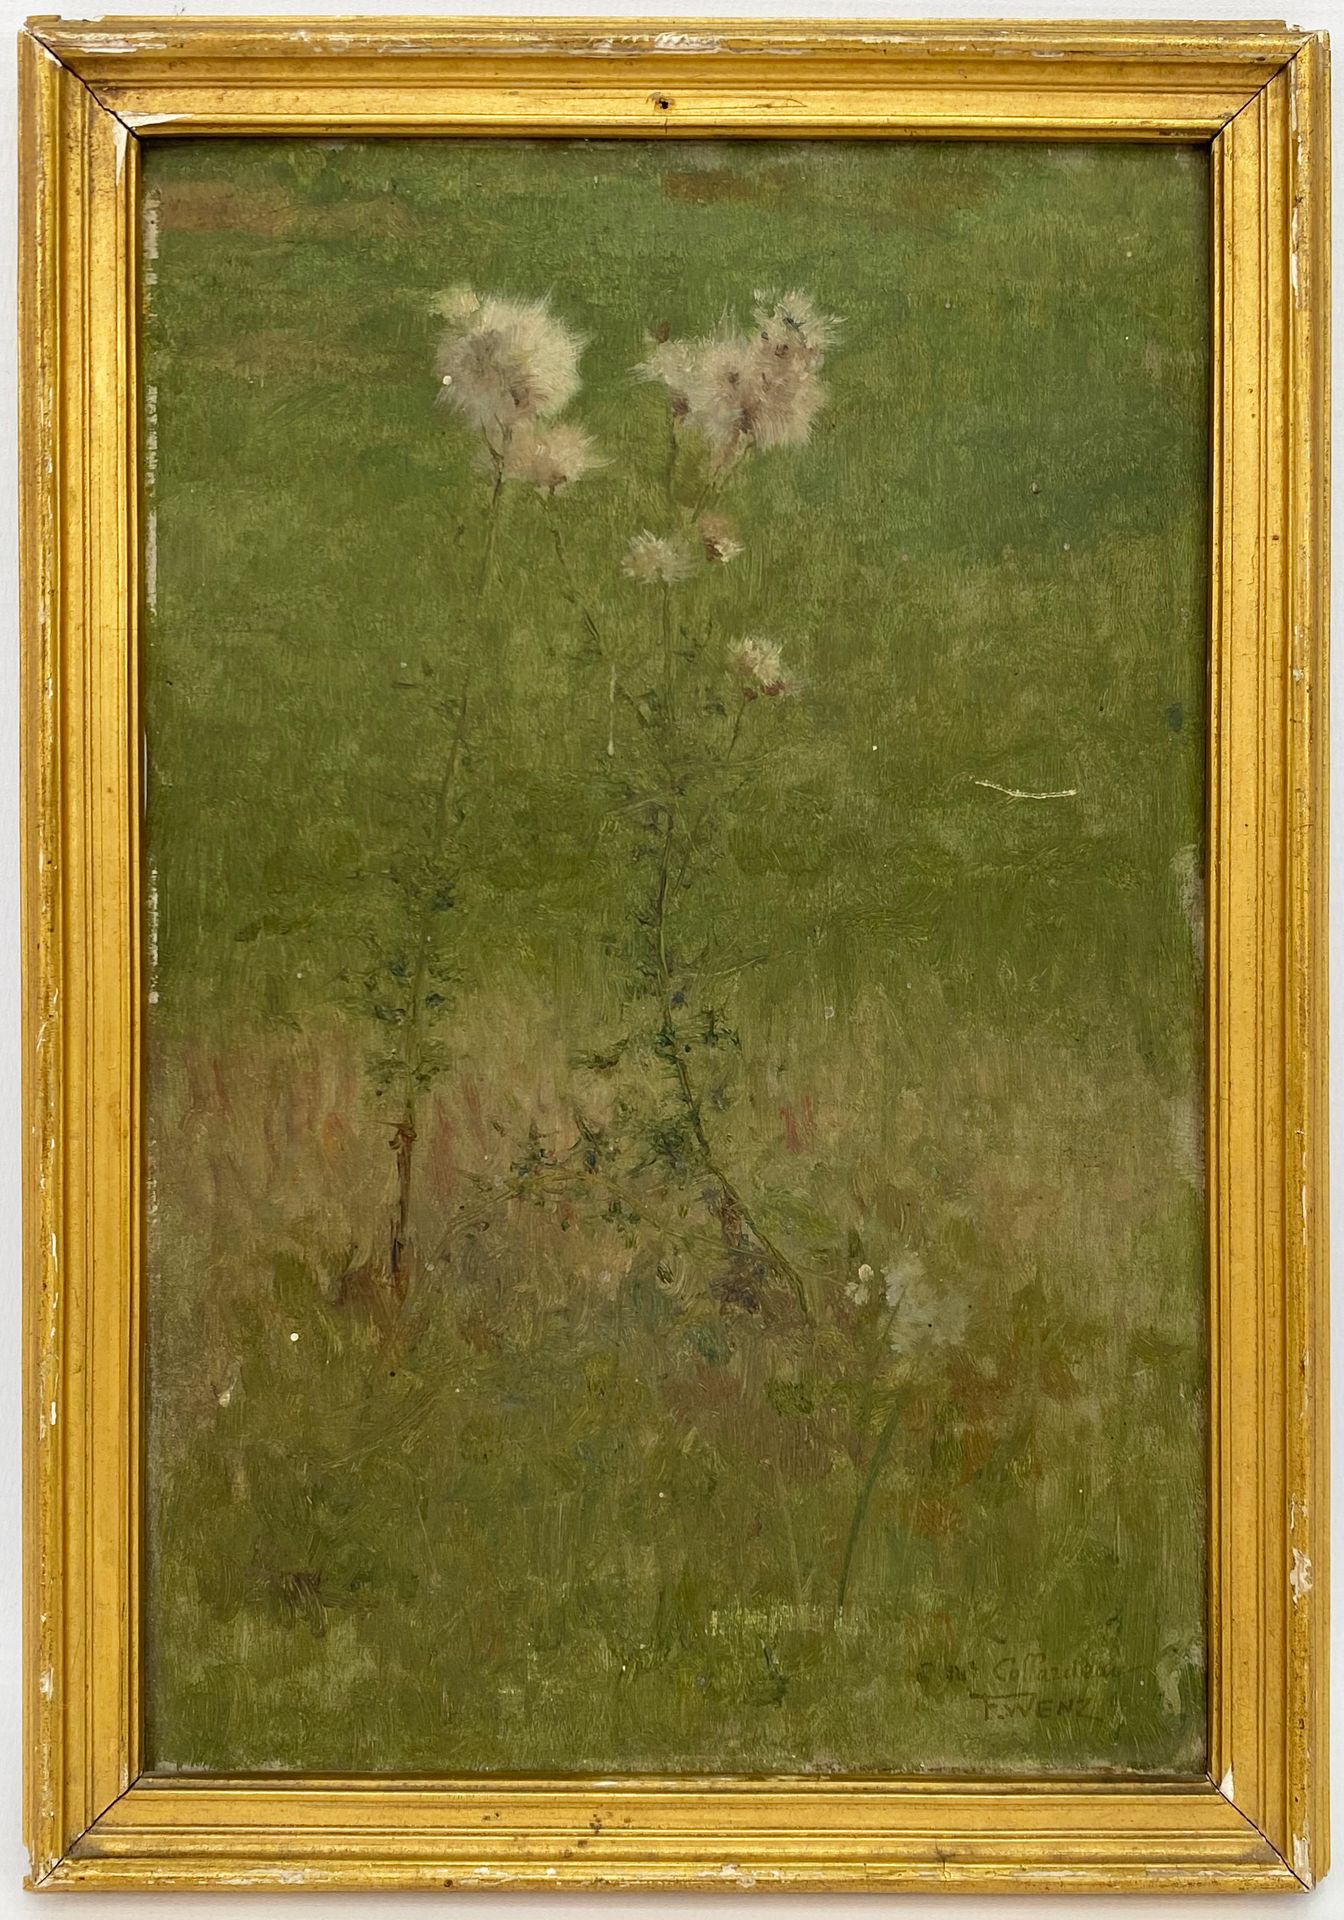 Null Frederic WENZ (1865-1940)

Thistles in bloom.

Oil on panel.

H. 24 cm

L. &hellip;